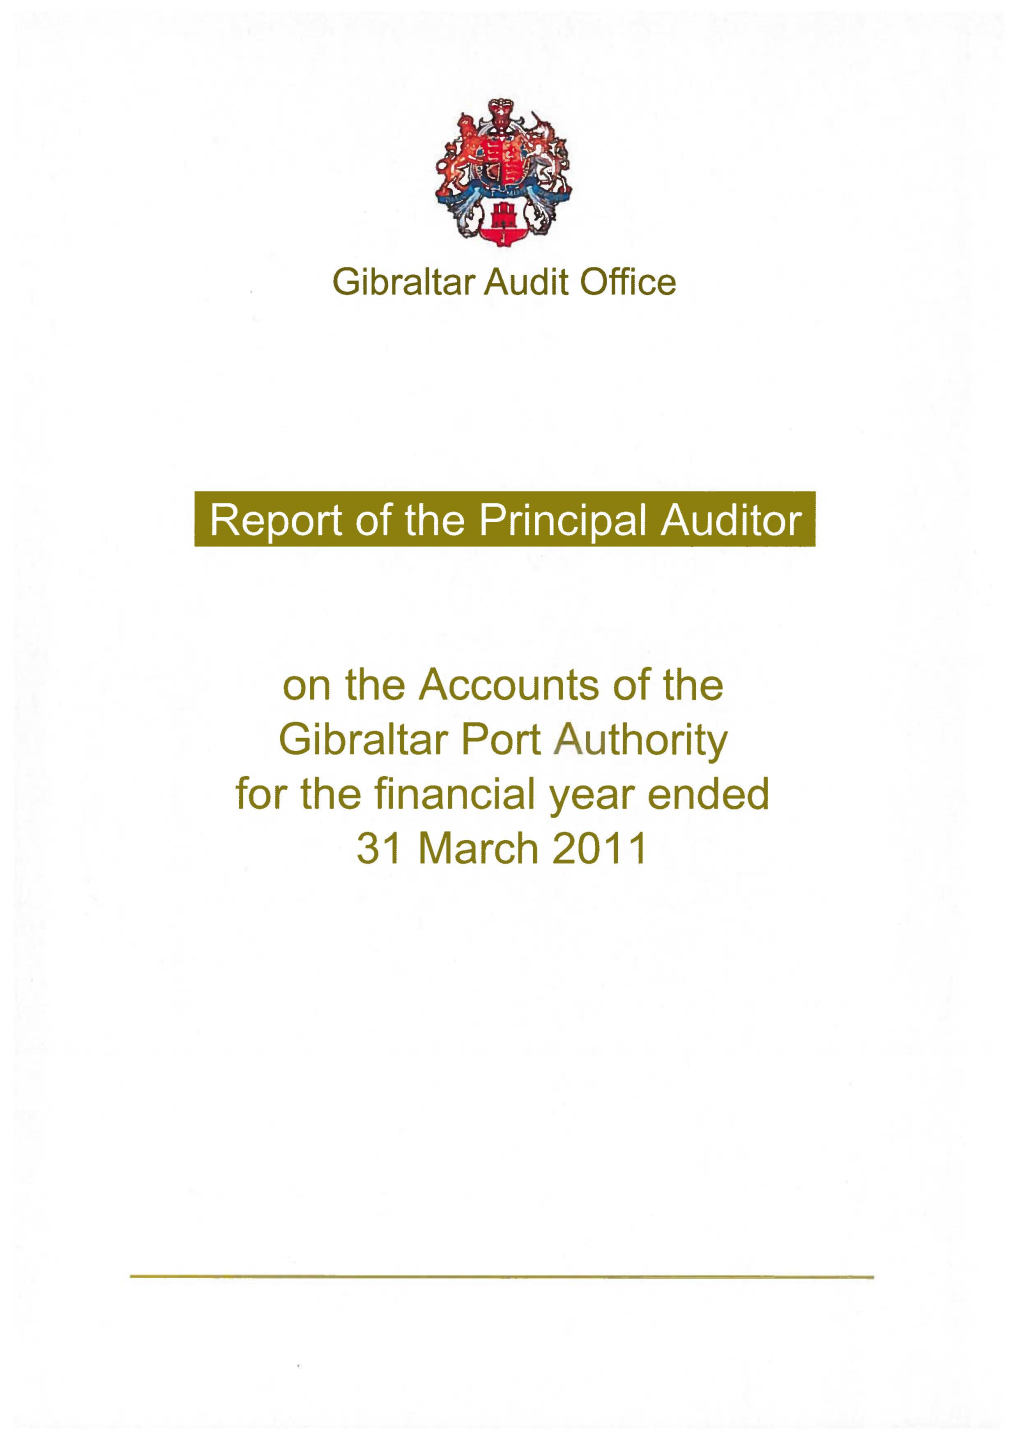 Accounts of the Gibraltar Port Authority for the Financial Year Ended 31 March 2011 TABLE of CONTENTS Page No